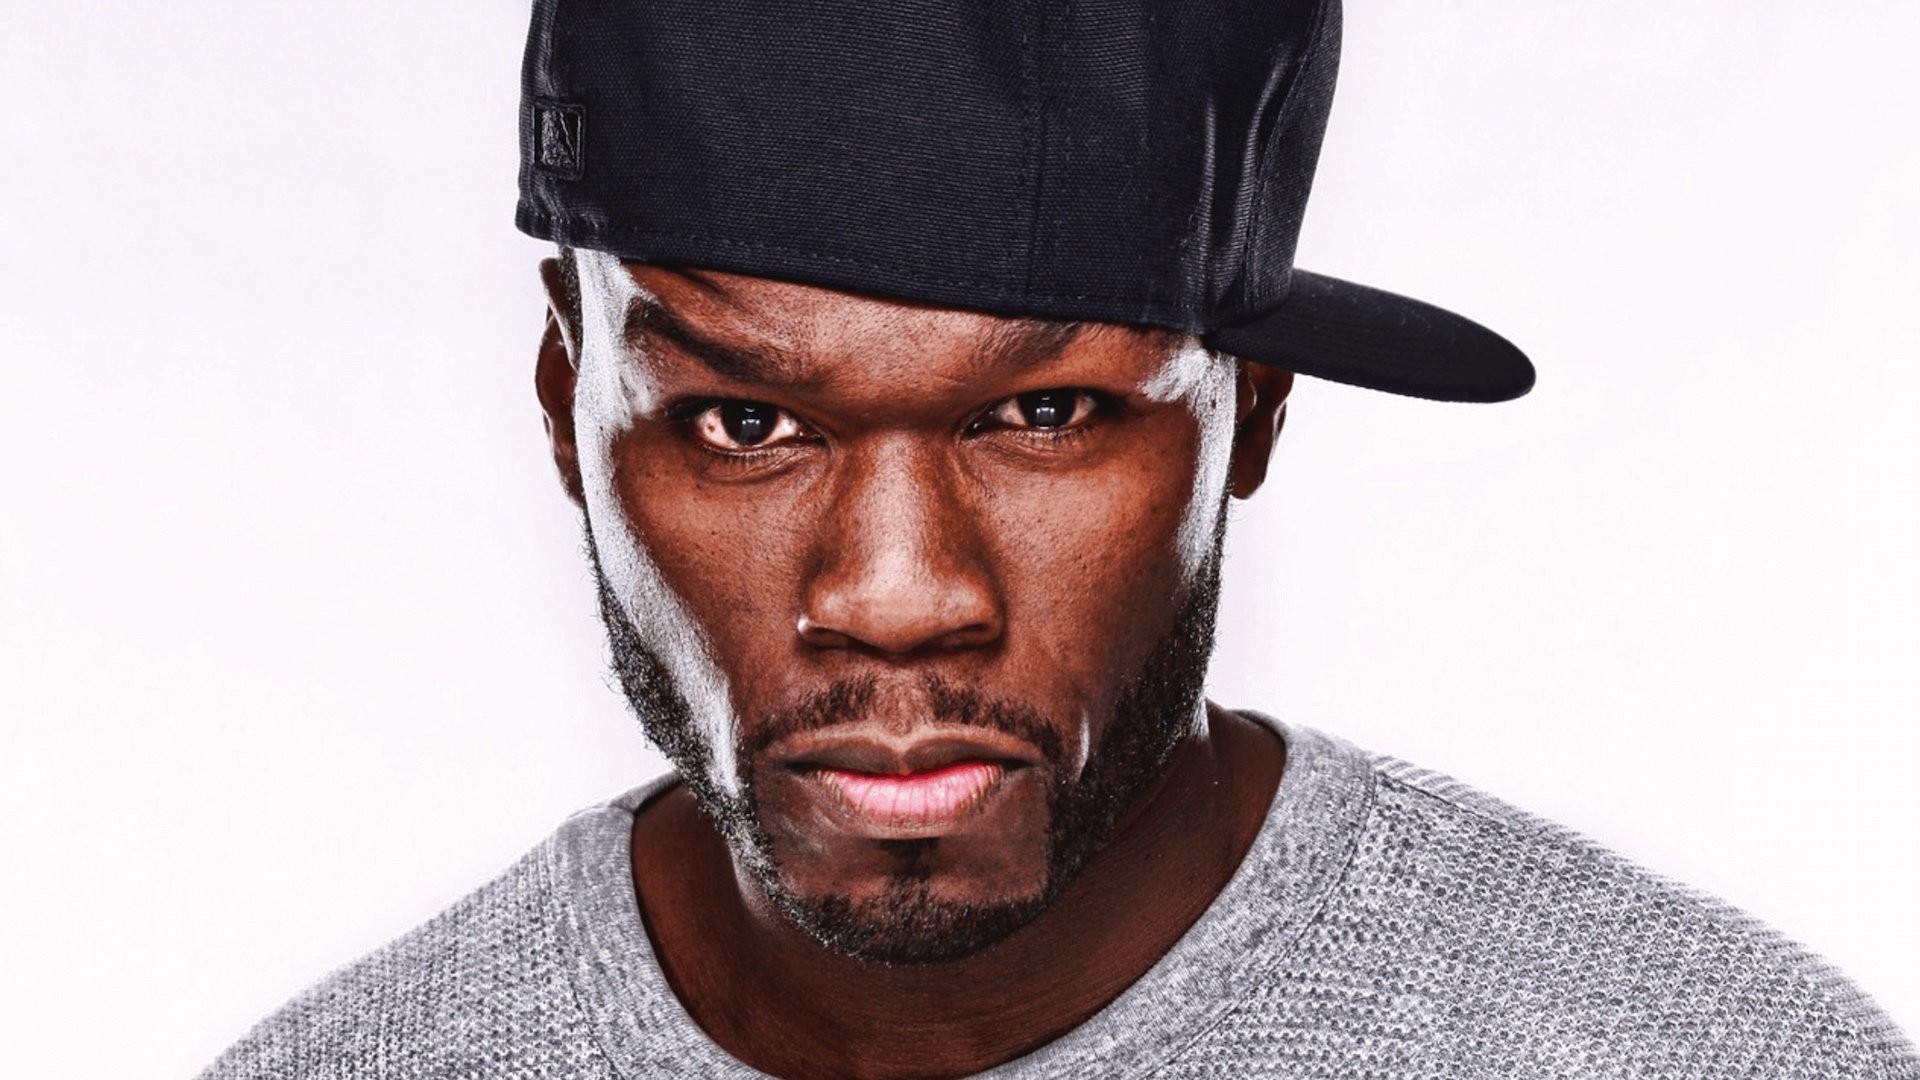 1920x1080 50 Cent Buys Up 200 Front Row Tickets To Ja Rule Just To Leave Them Empty